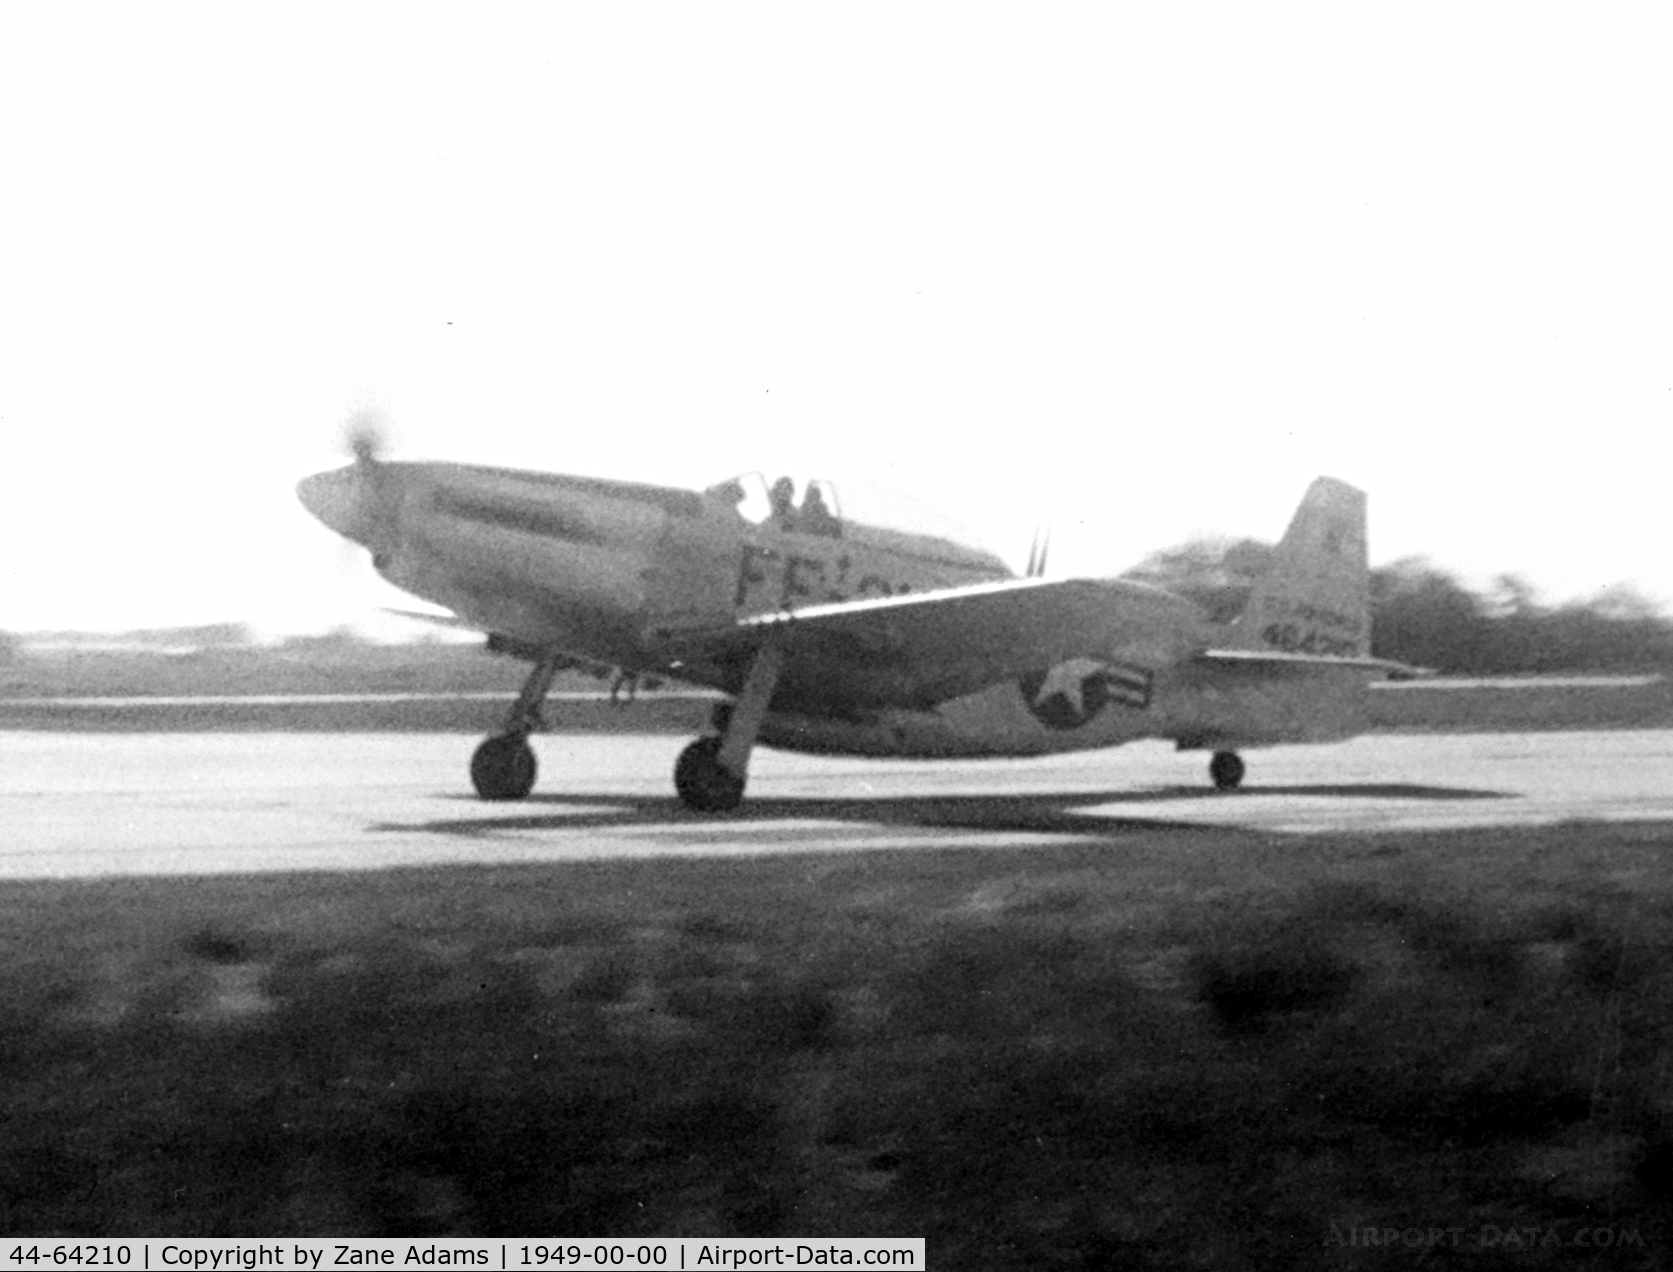 44-64210, 1944 North American P-51H Mustang C/N 126-37636, USAF P-51H at the former Lowry AFB - Denver, CO - This airplane was reported detroyed on the ground in an accident at Tyndall AFB 1/12/1951